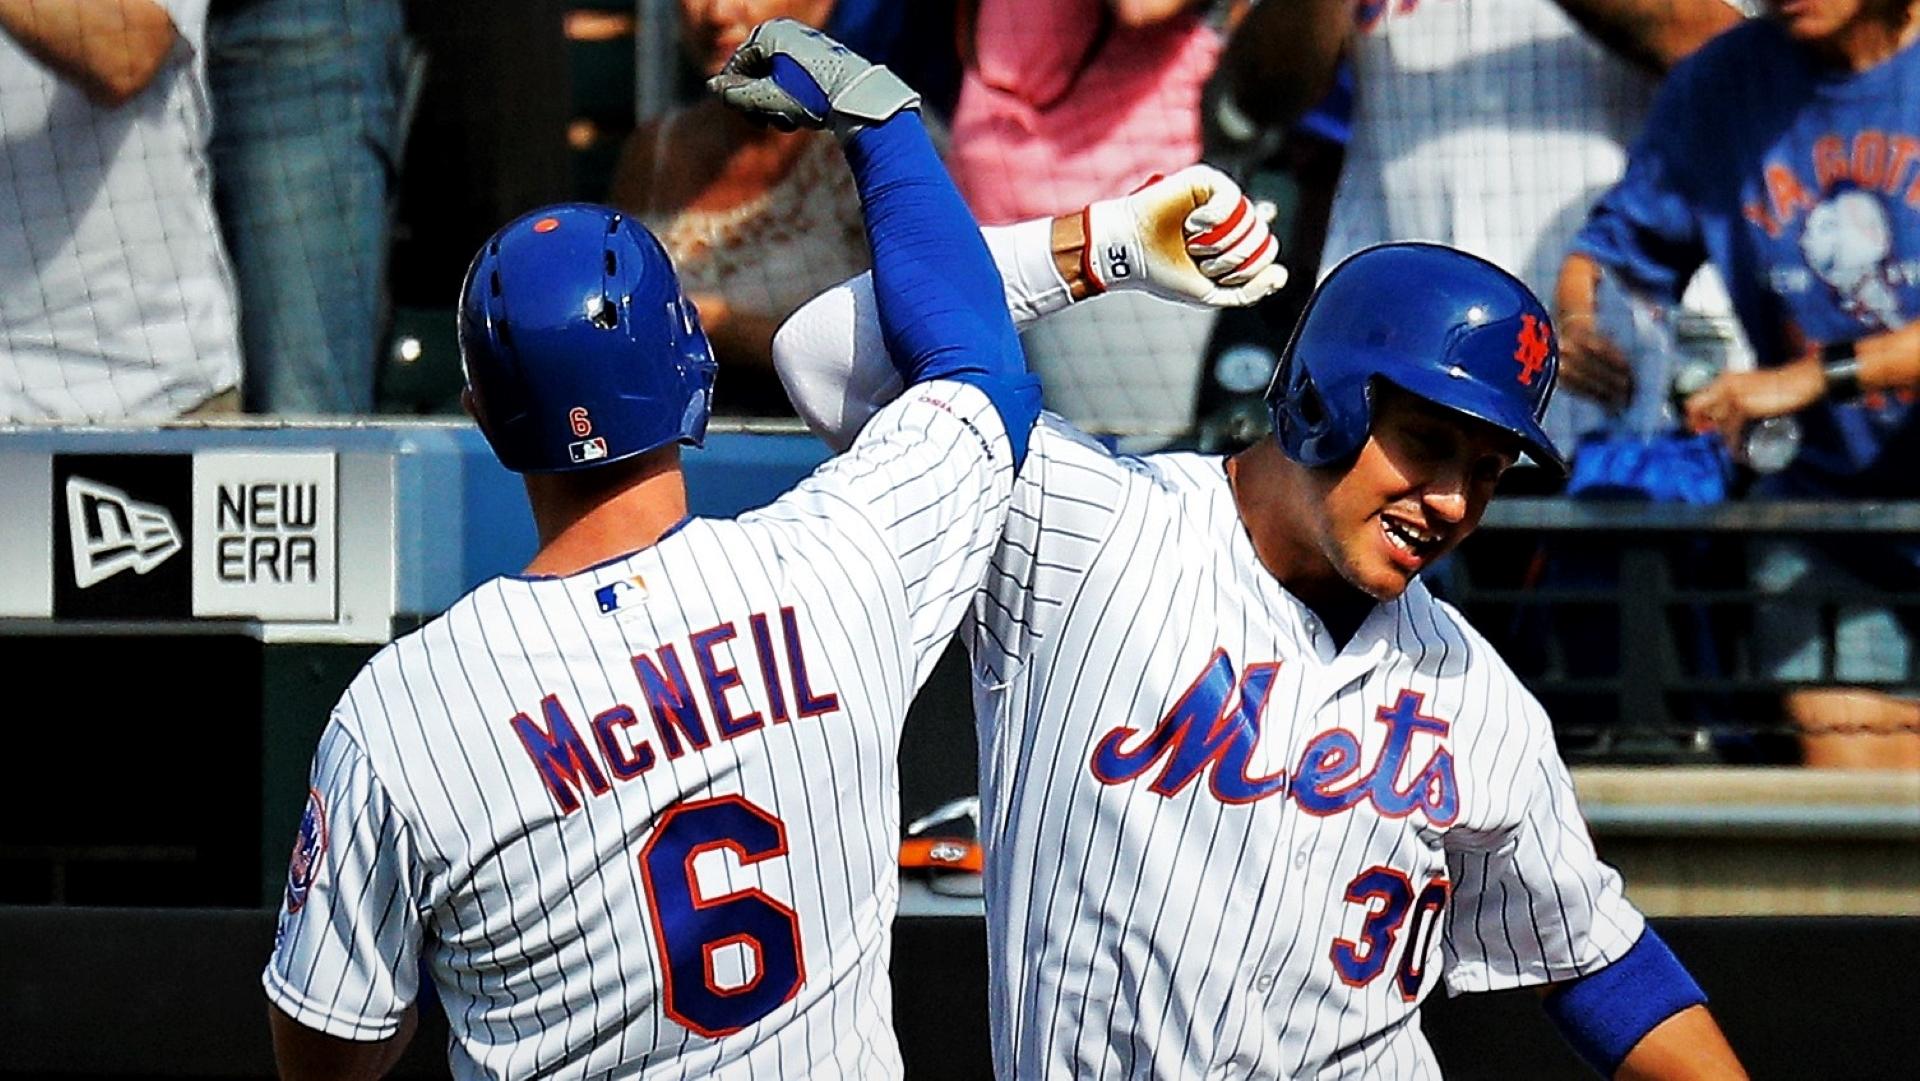 Aug 5, 2019; New York City, NY, USA; New York Mets second baseman Jeff McNeil (6) is congratulated by right fielder Michael Conforto (30) after hitting a solo home run against the Miami Marlins during the first inning of game one of a doubleheader at CitiField. Mandatory Credit: Andy Marlin-USA TODAY Sports / © Andy Marlin-USA TODAY Sports